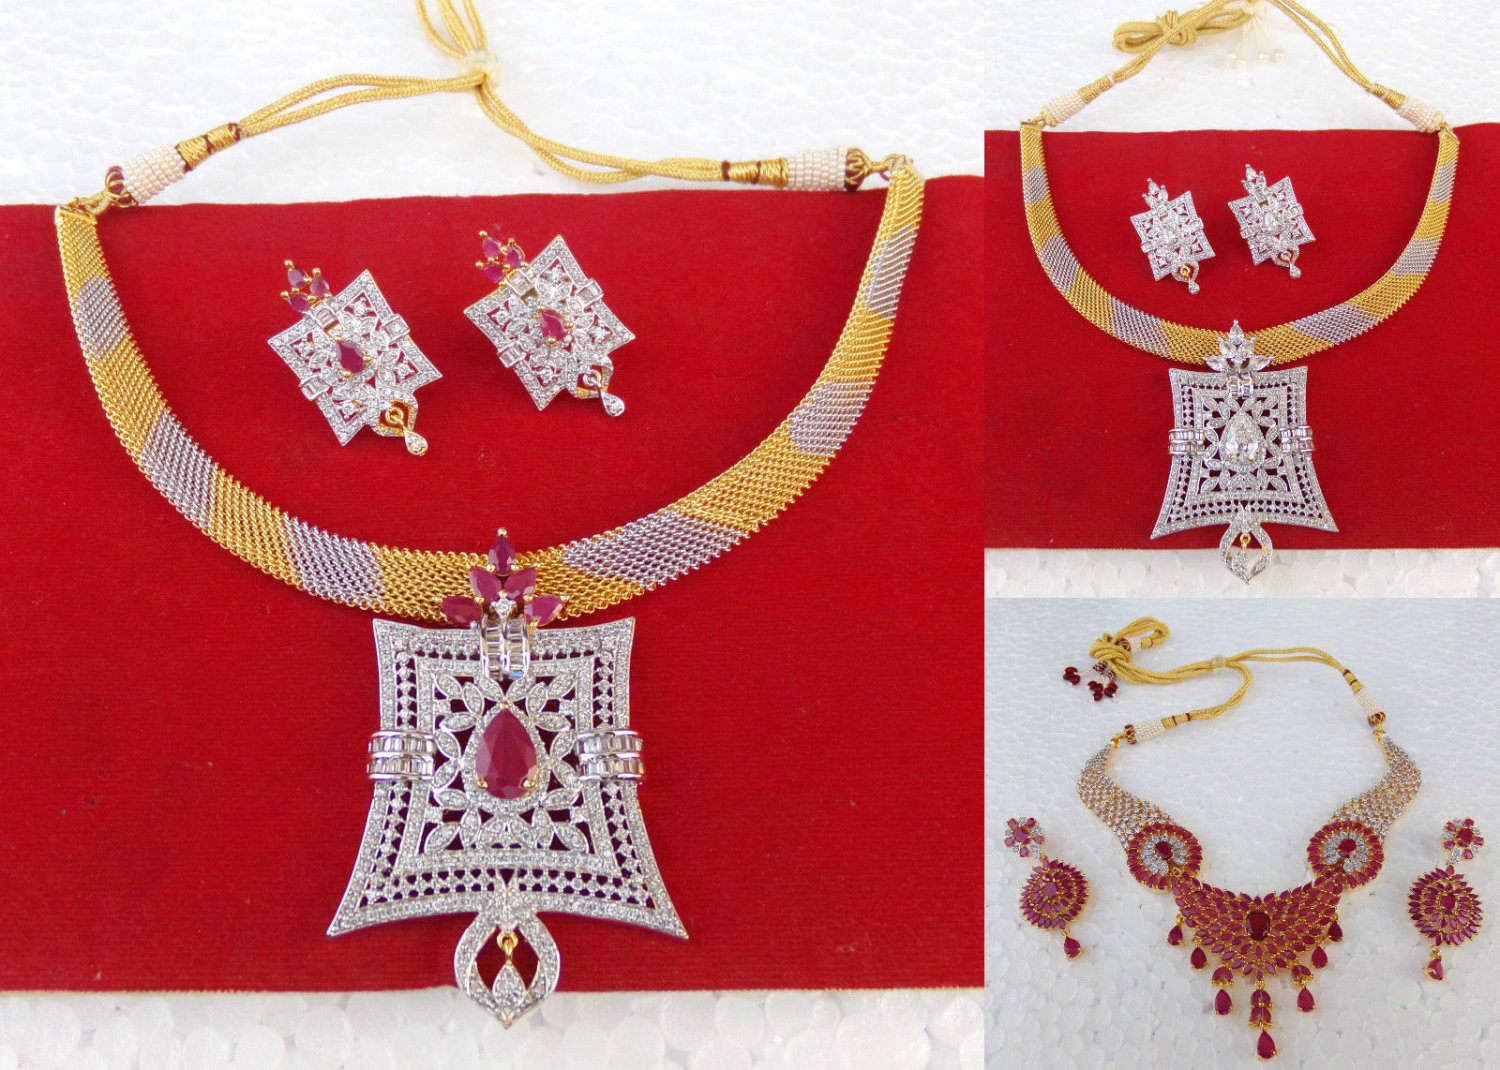 Details about   Ethnic Indian Golden American Diamante Necklace Earrings Bridal Ruby Jewelry Set